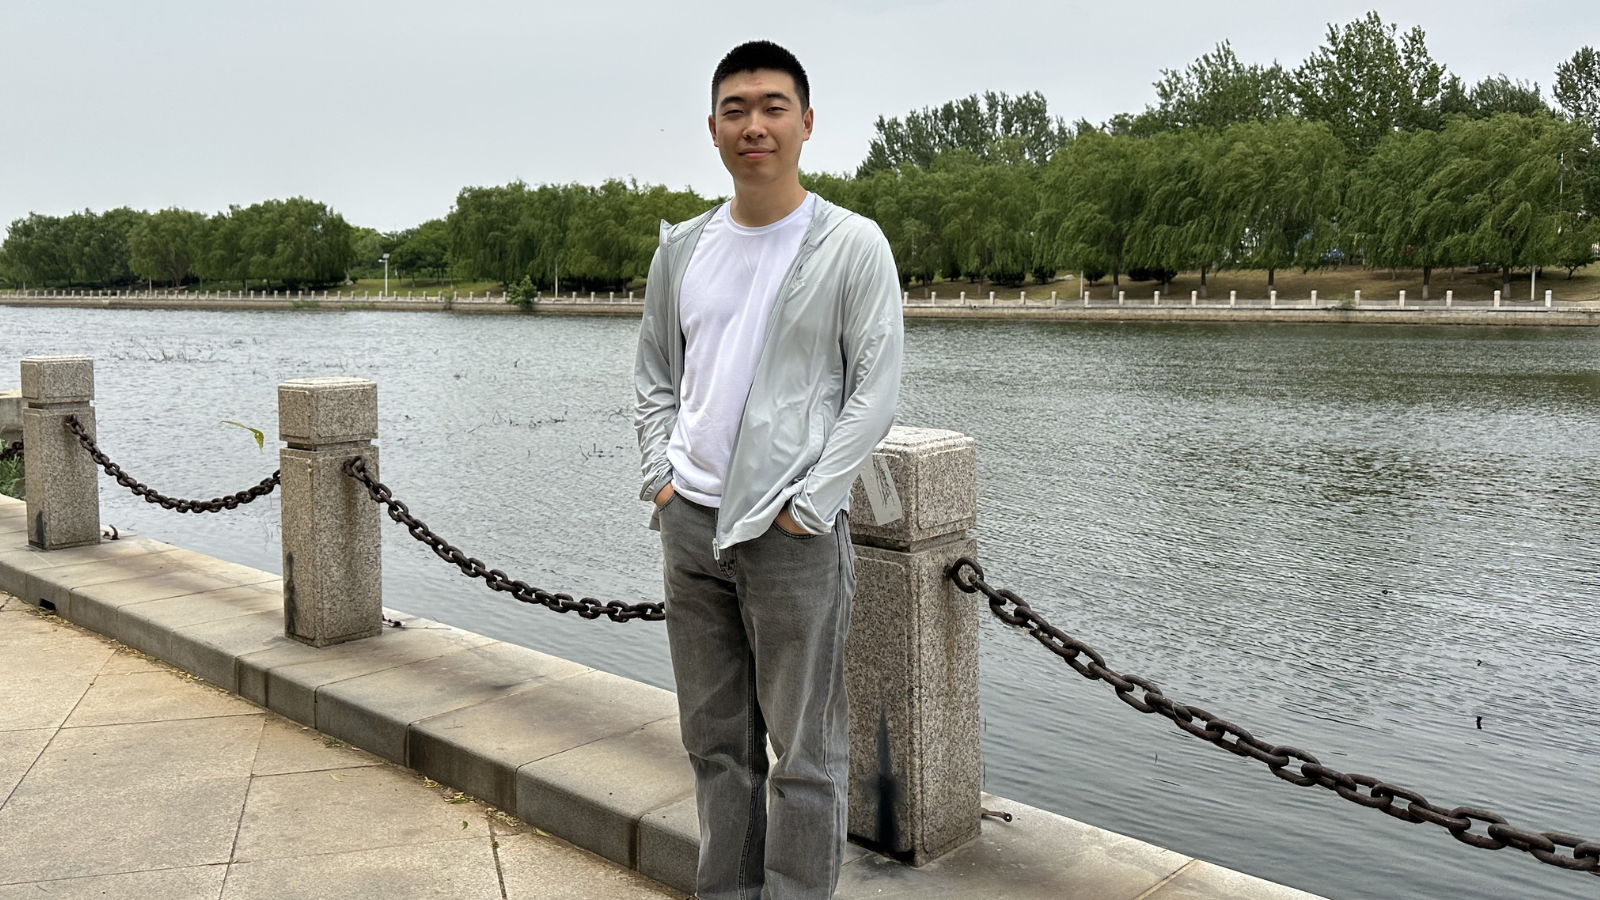 YouQian standing in front of a lake with trees.